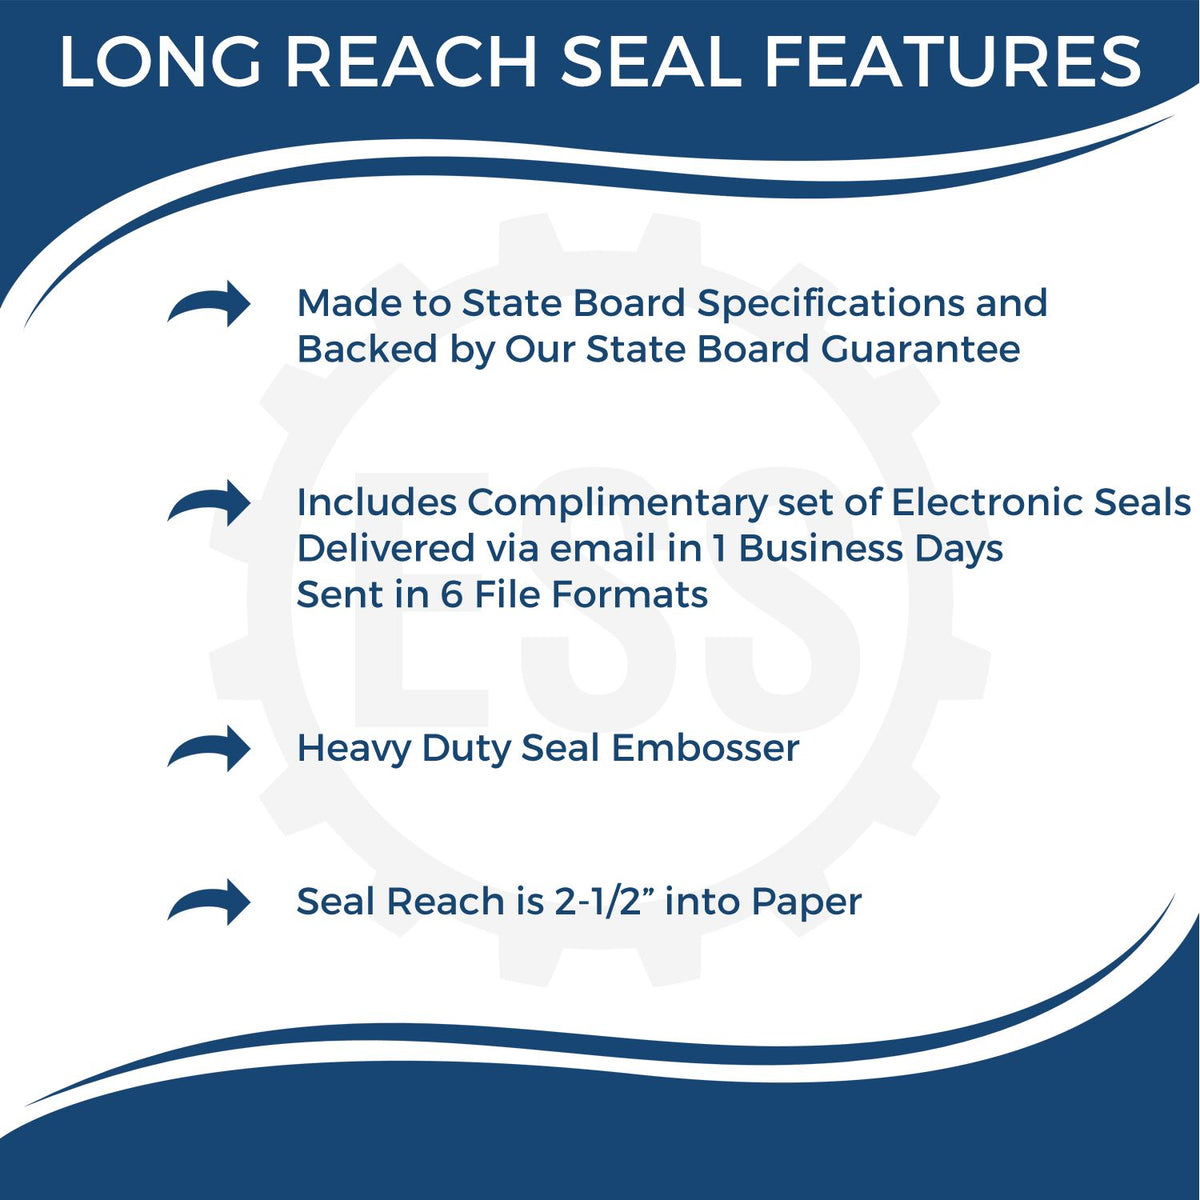 A picture of an infographic highlighting the selling points for the Long Reach Virginia PE Seal